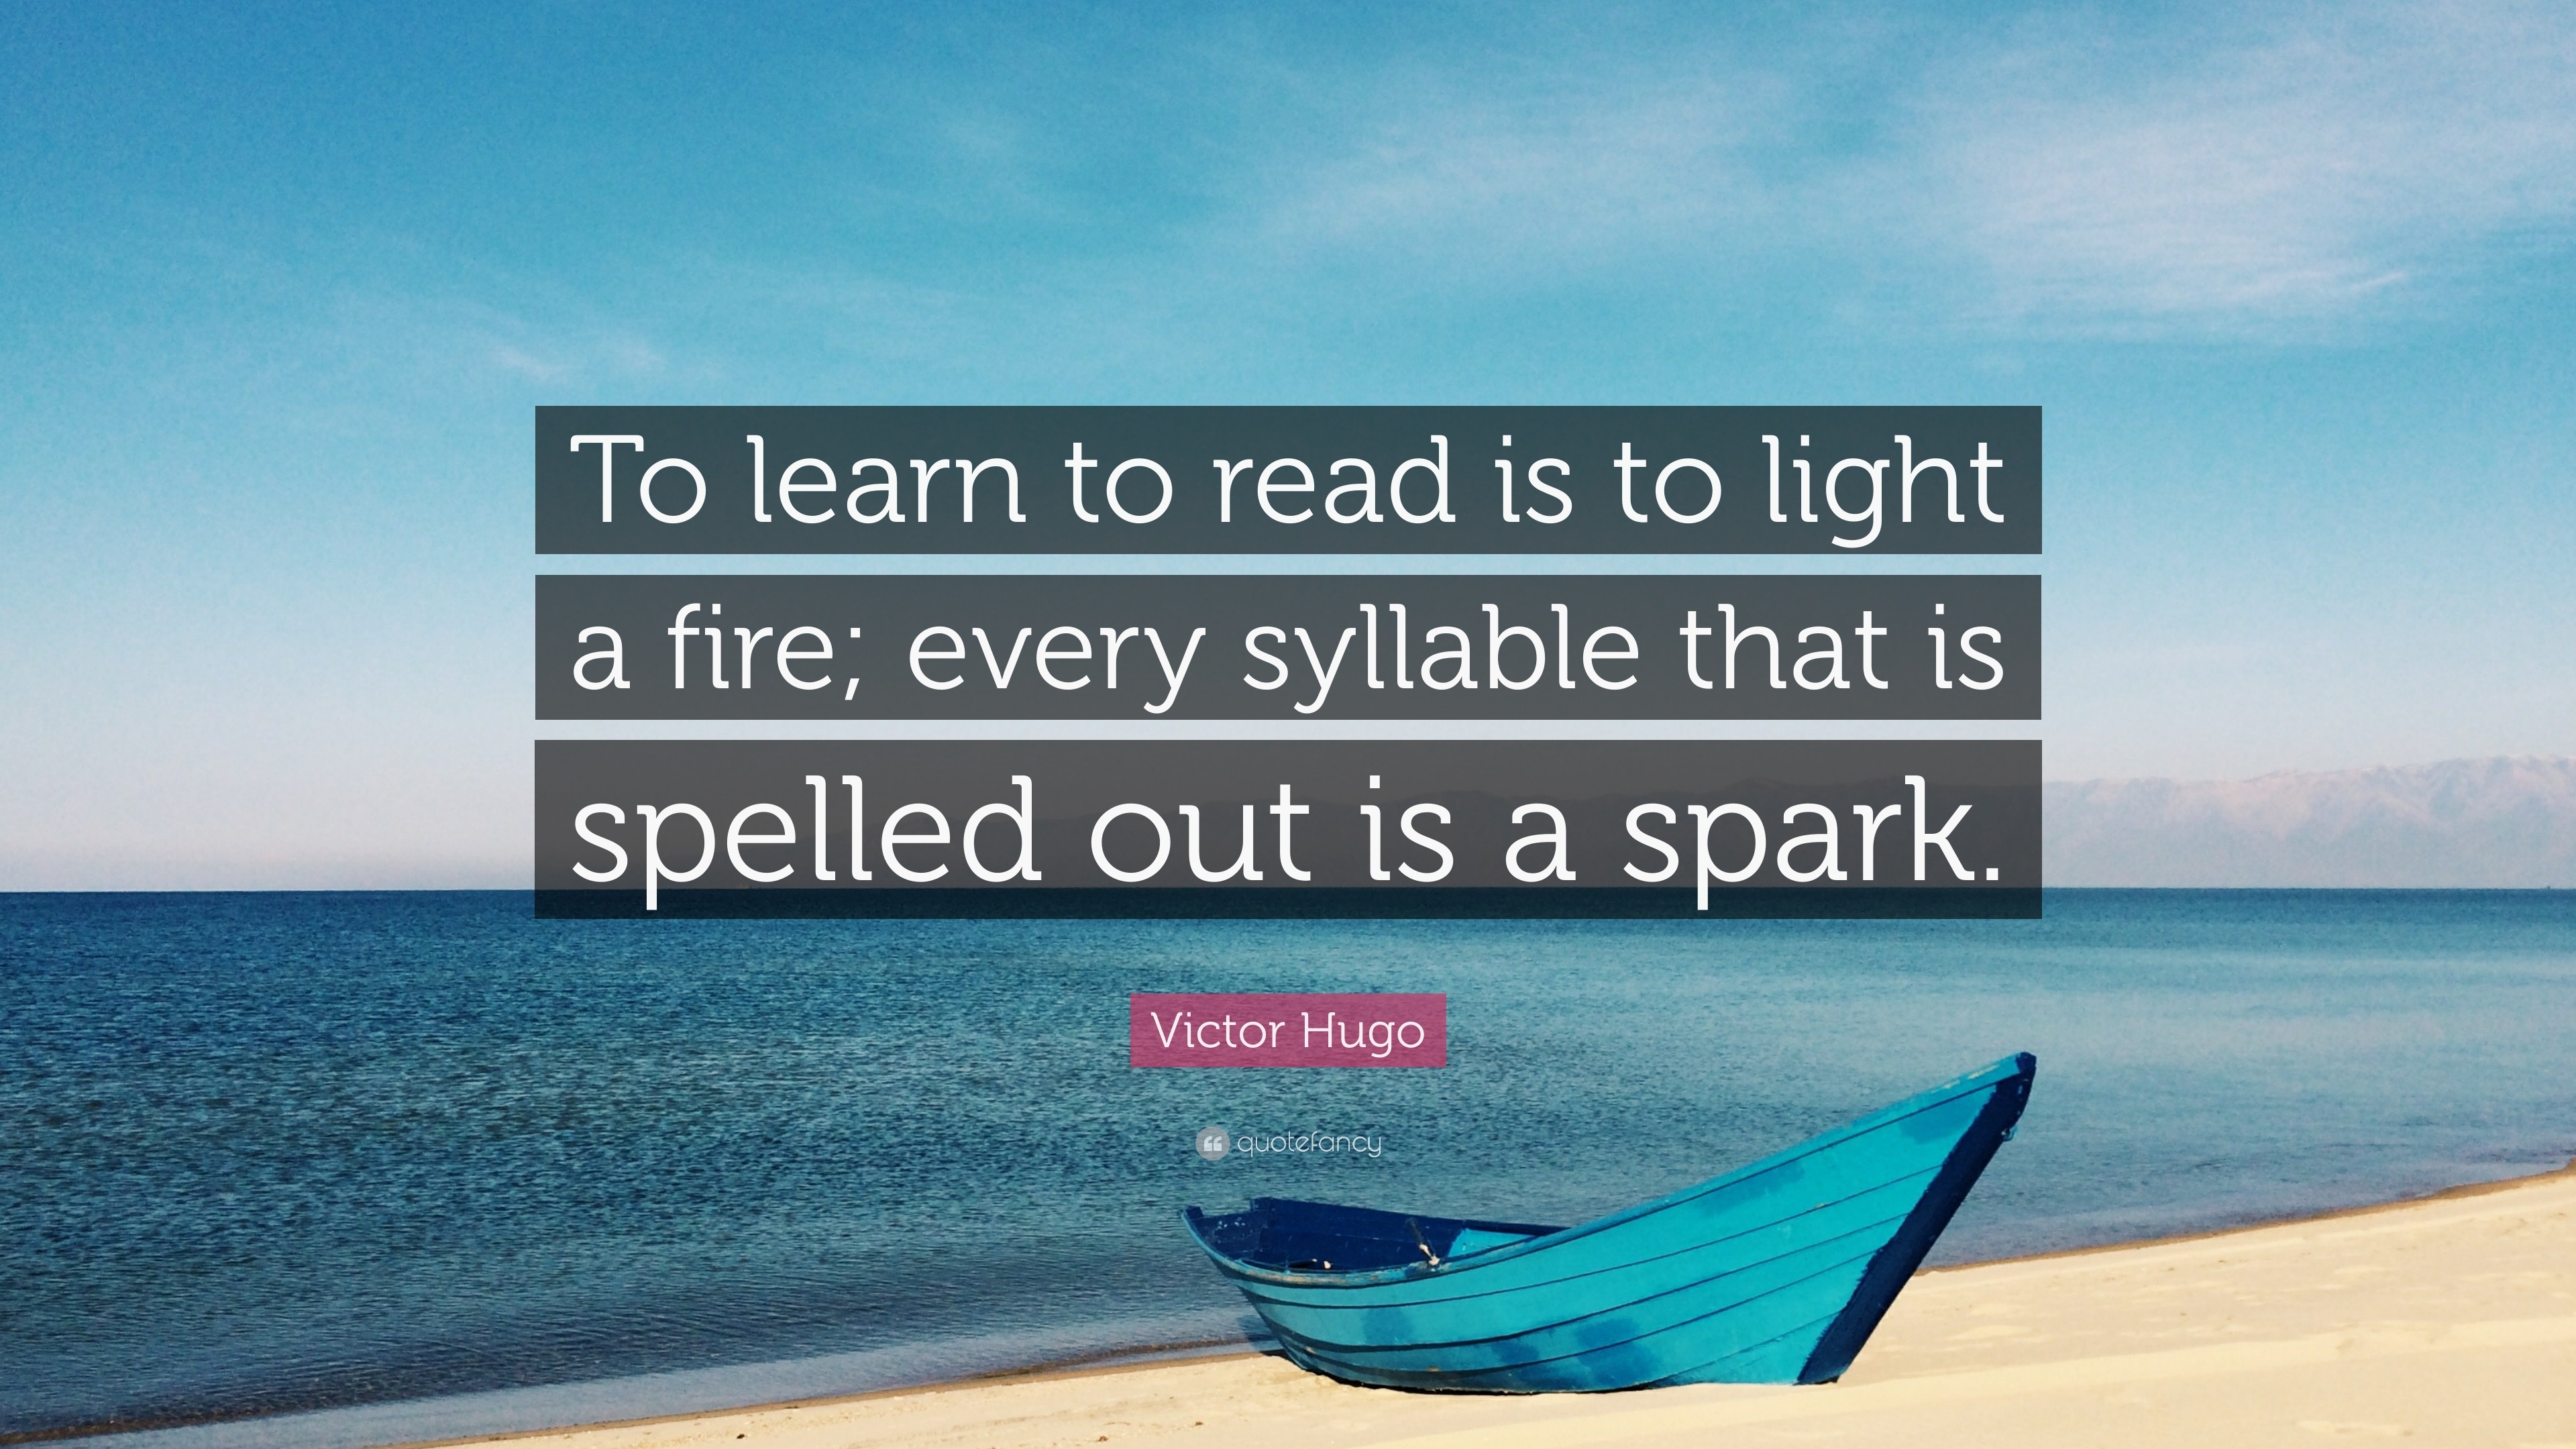 Victor Hugo Quote: “To learn to read is to light a fire; every syllable